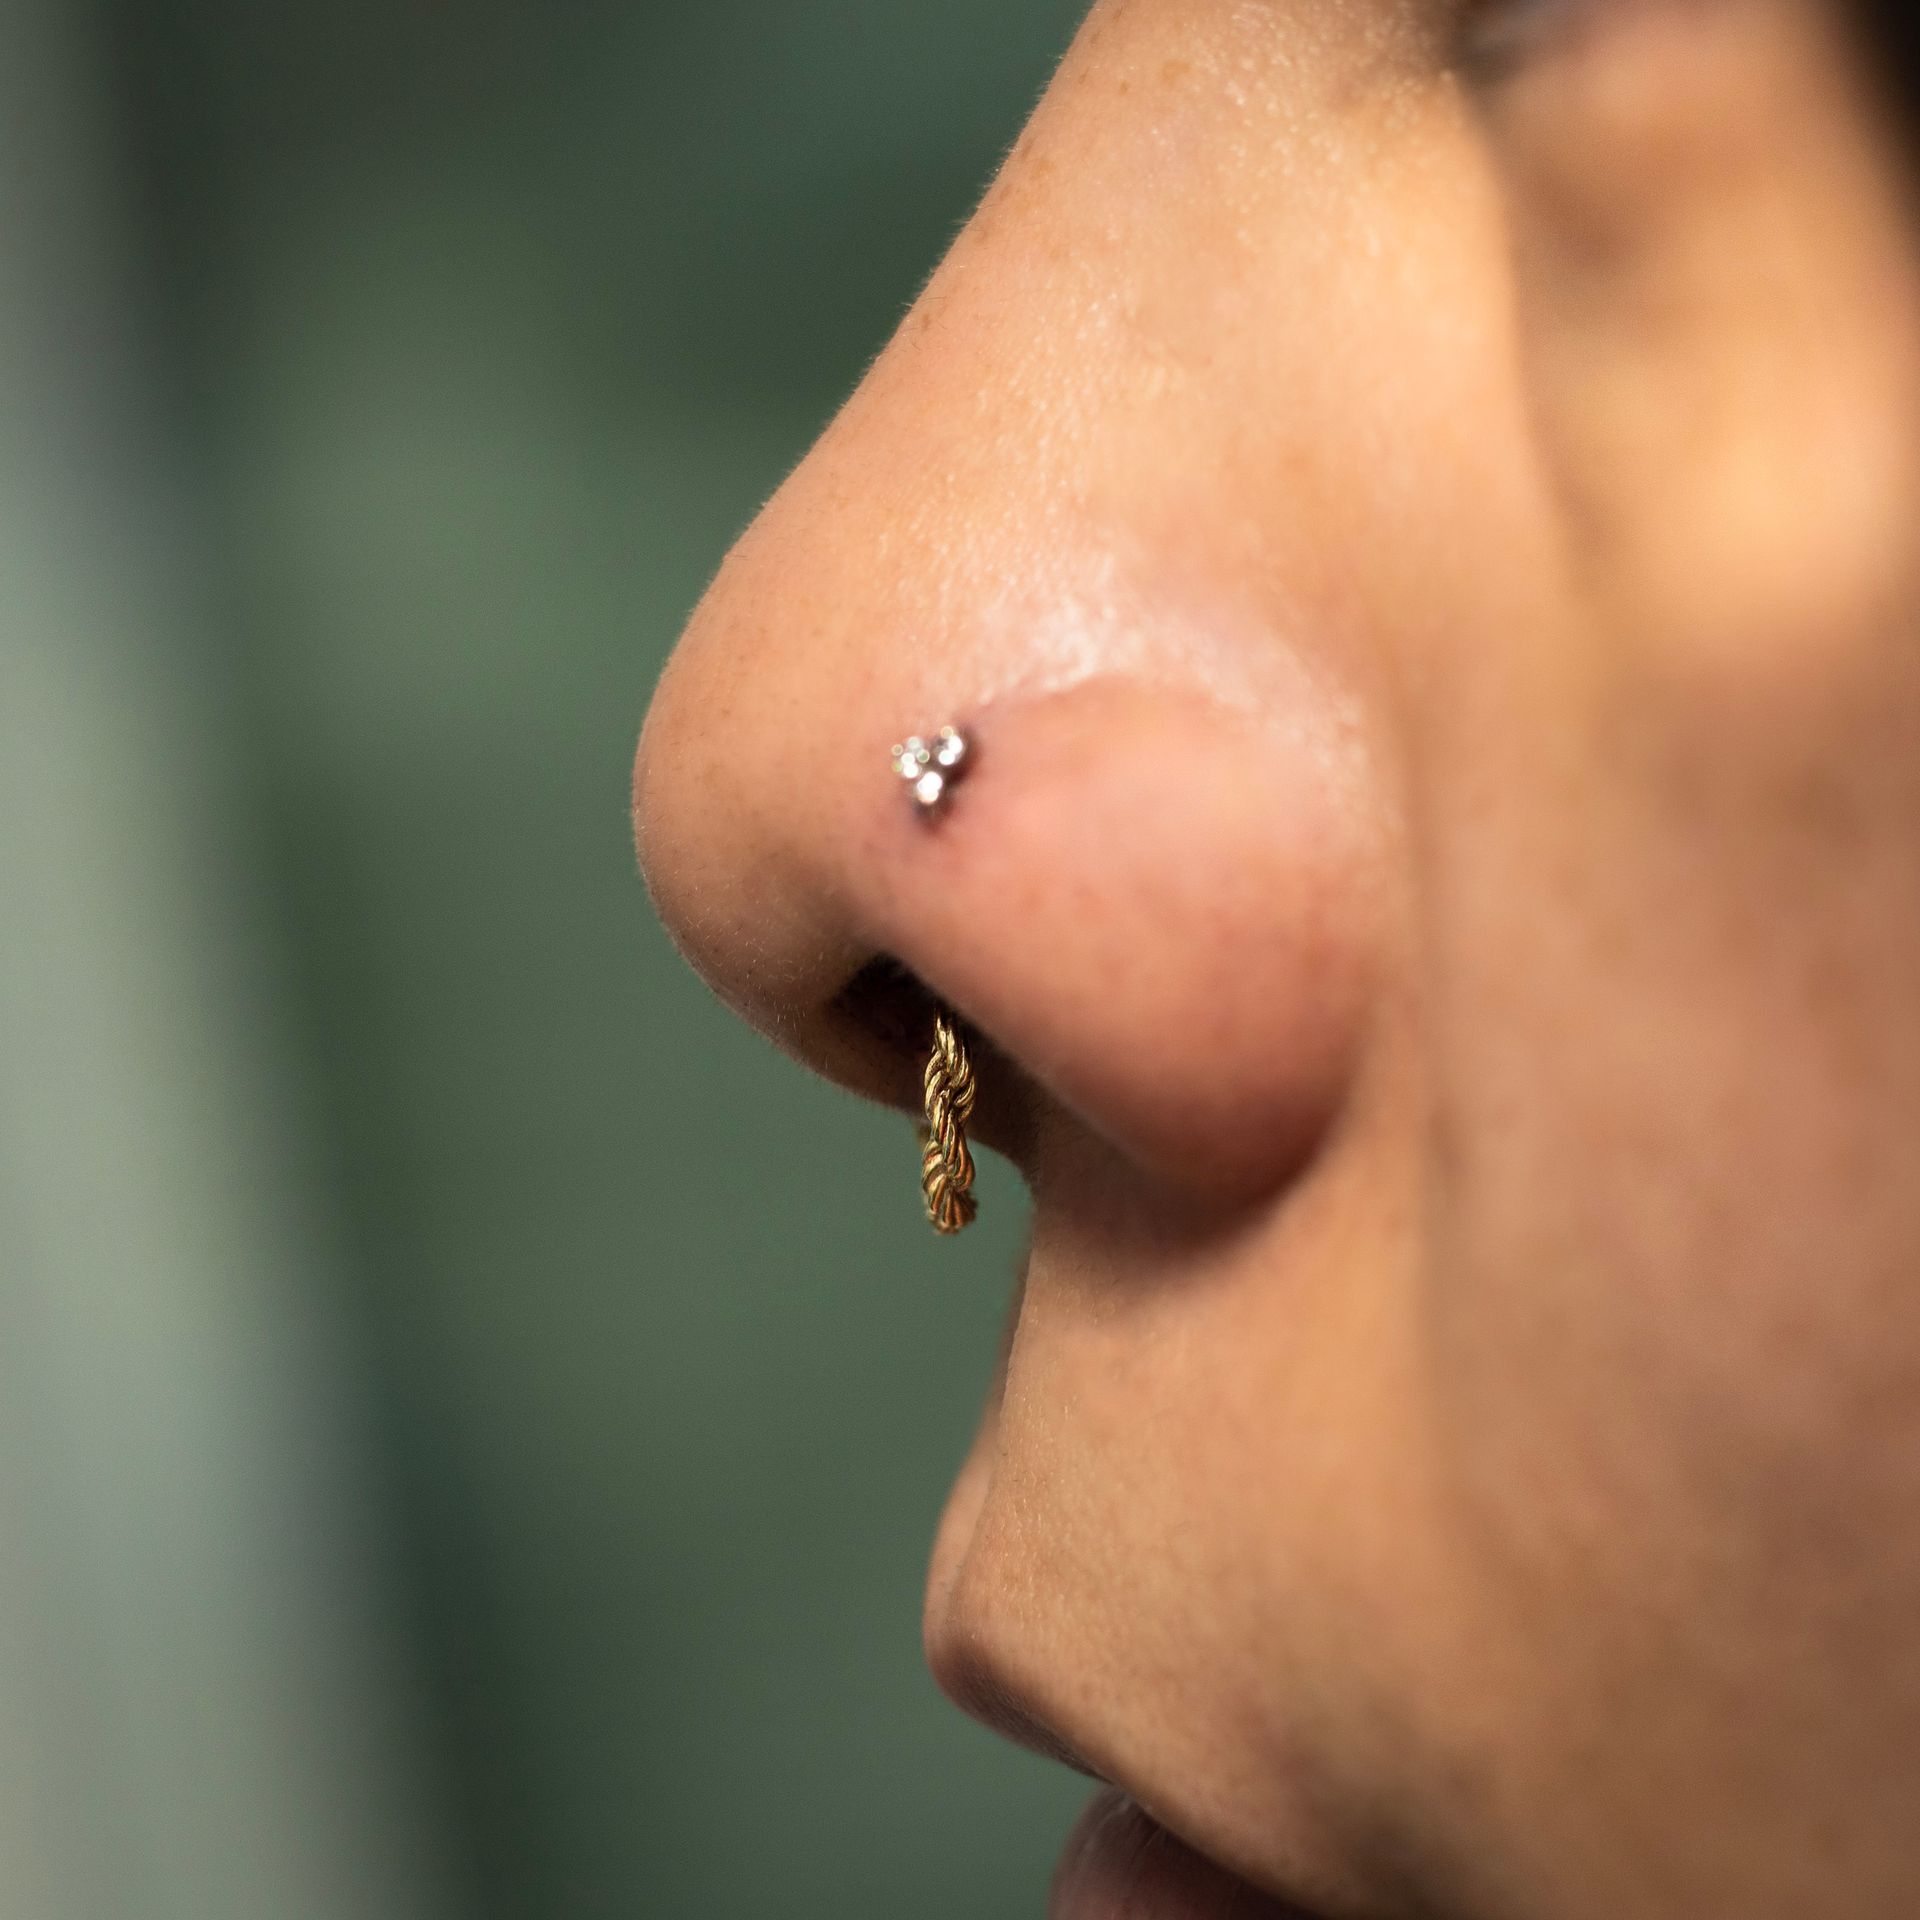 a close up of a woman 's nose with a nose ring .